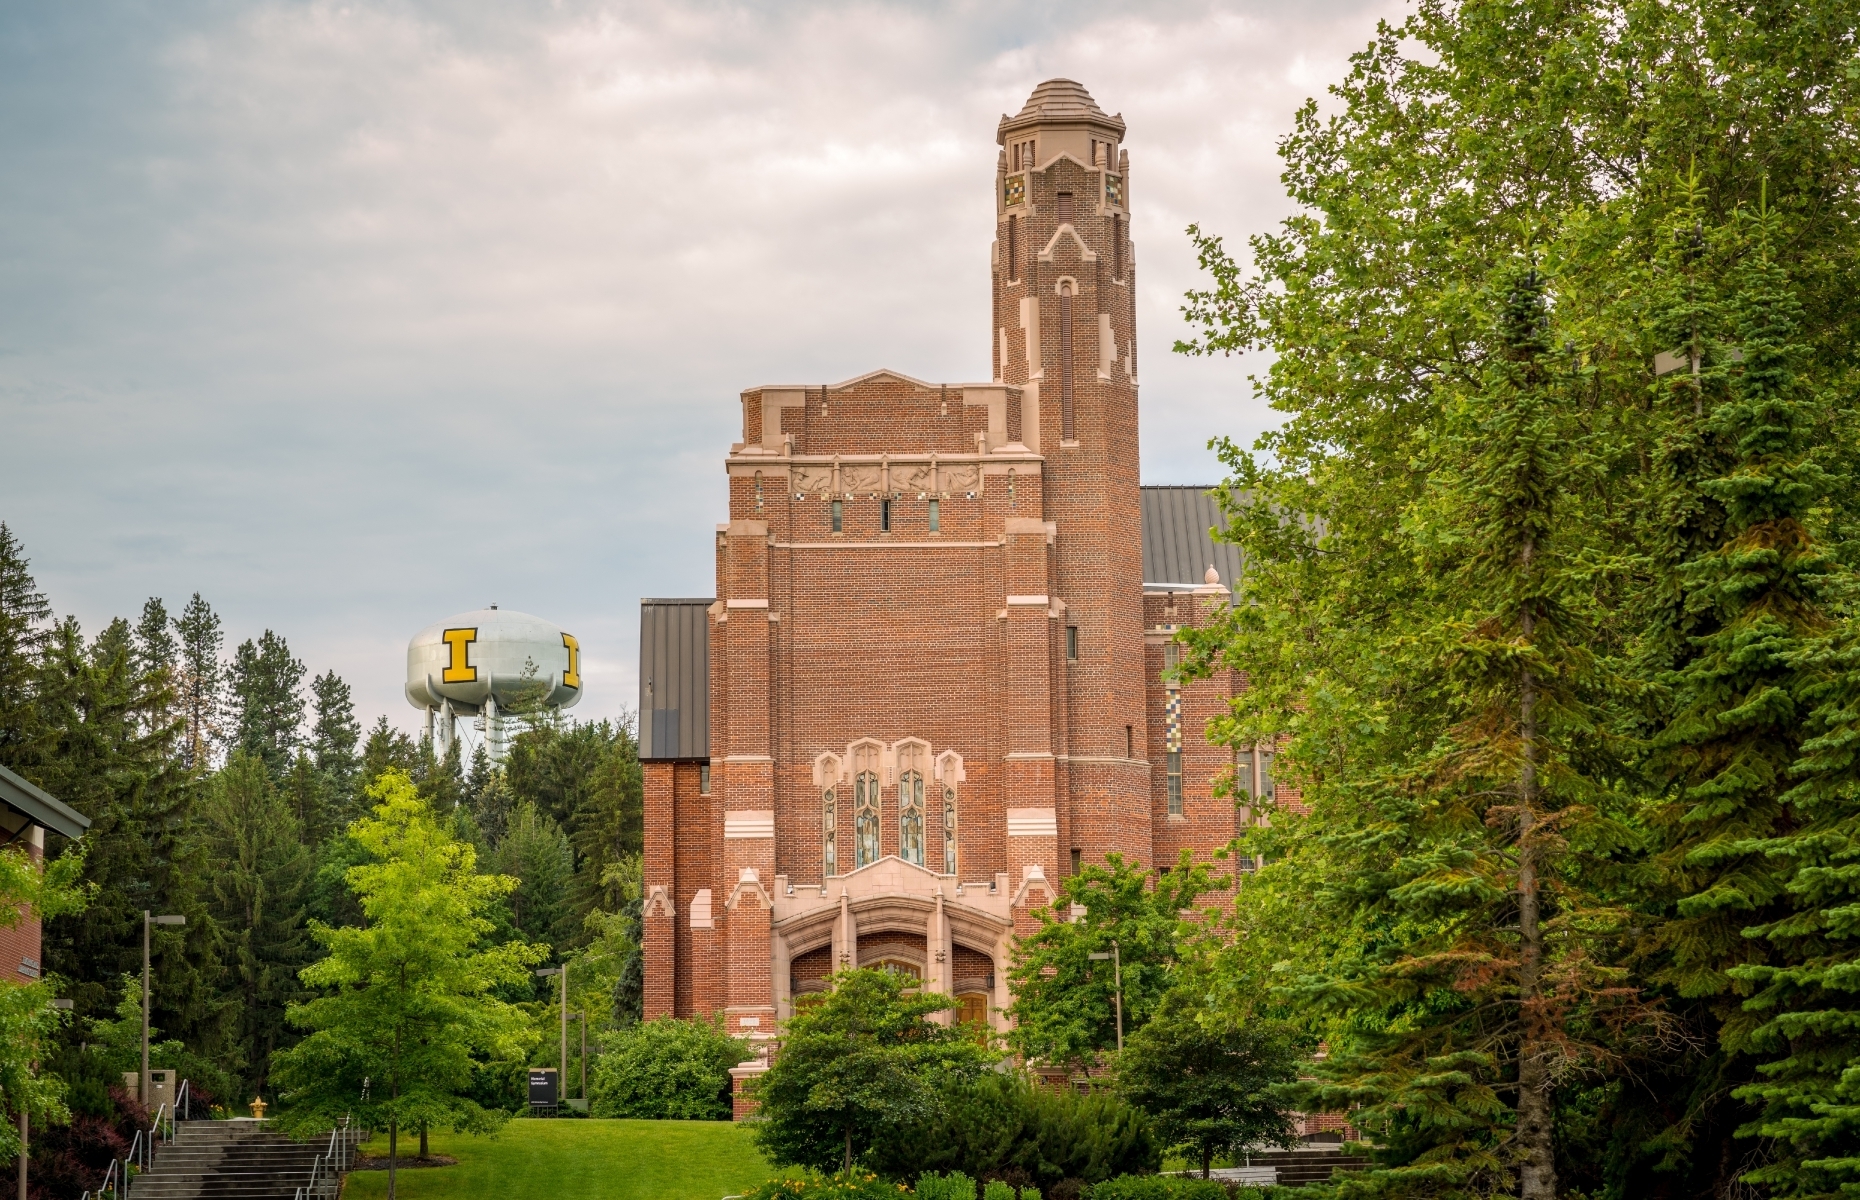 <p>The University of Idaho’s <a href="https://www.uidaho.edu/about/locations/main-campus-moscow" rel="noreferrer noopener">Moscow campus</a> is situated in the bucolic Palouse hills of northern Idaho and is home to a sprawling arboretum and botanical garden.</p>